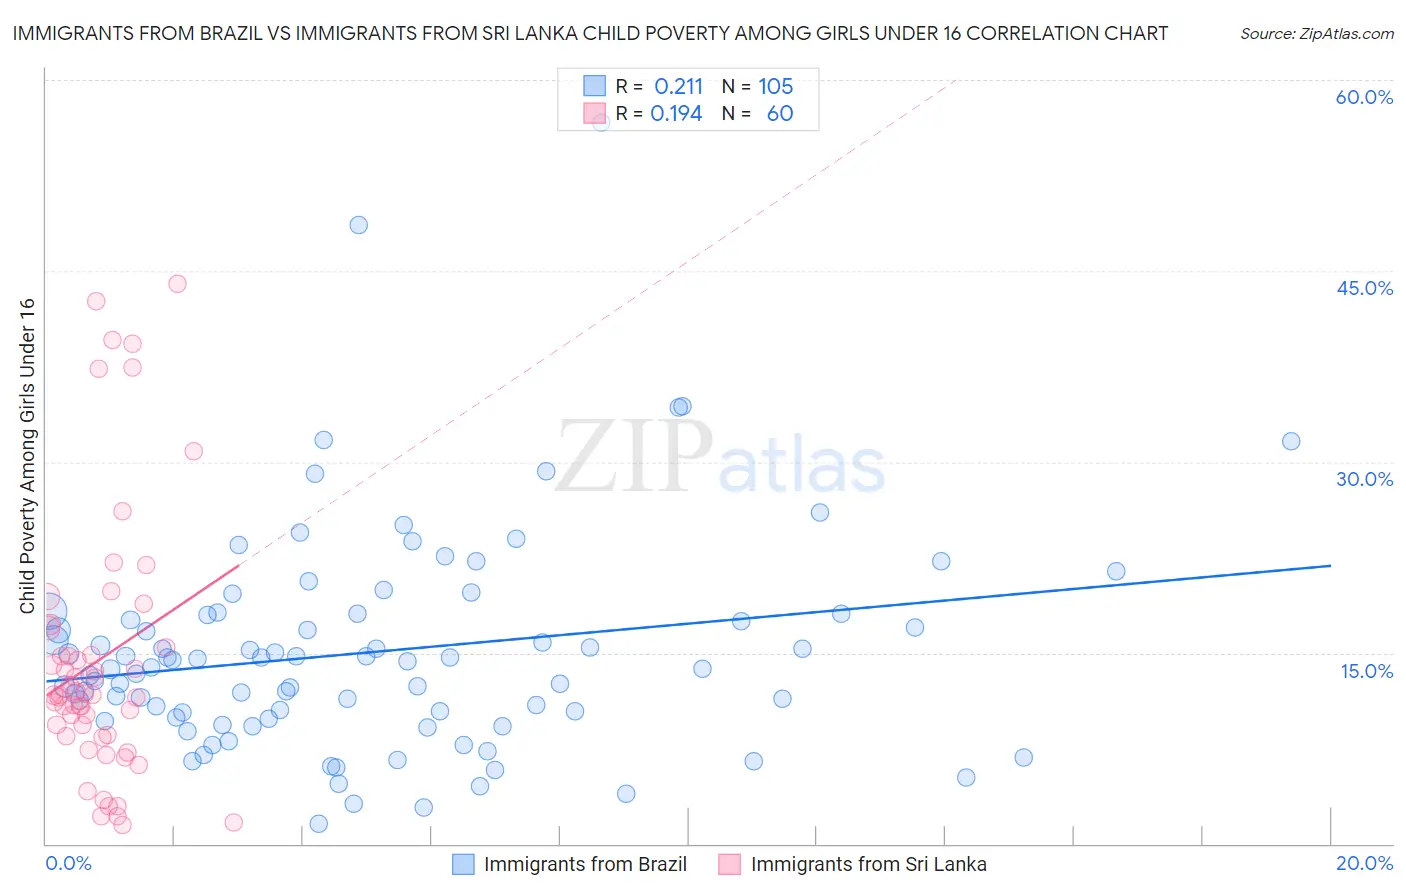 Immigrants from Brazil vs Immigrants from Sri Lanka Child Poverty Among Girls Under 16